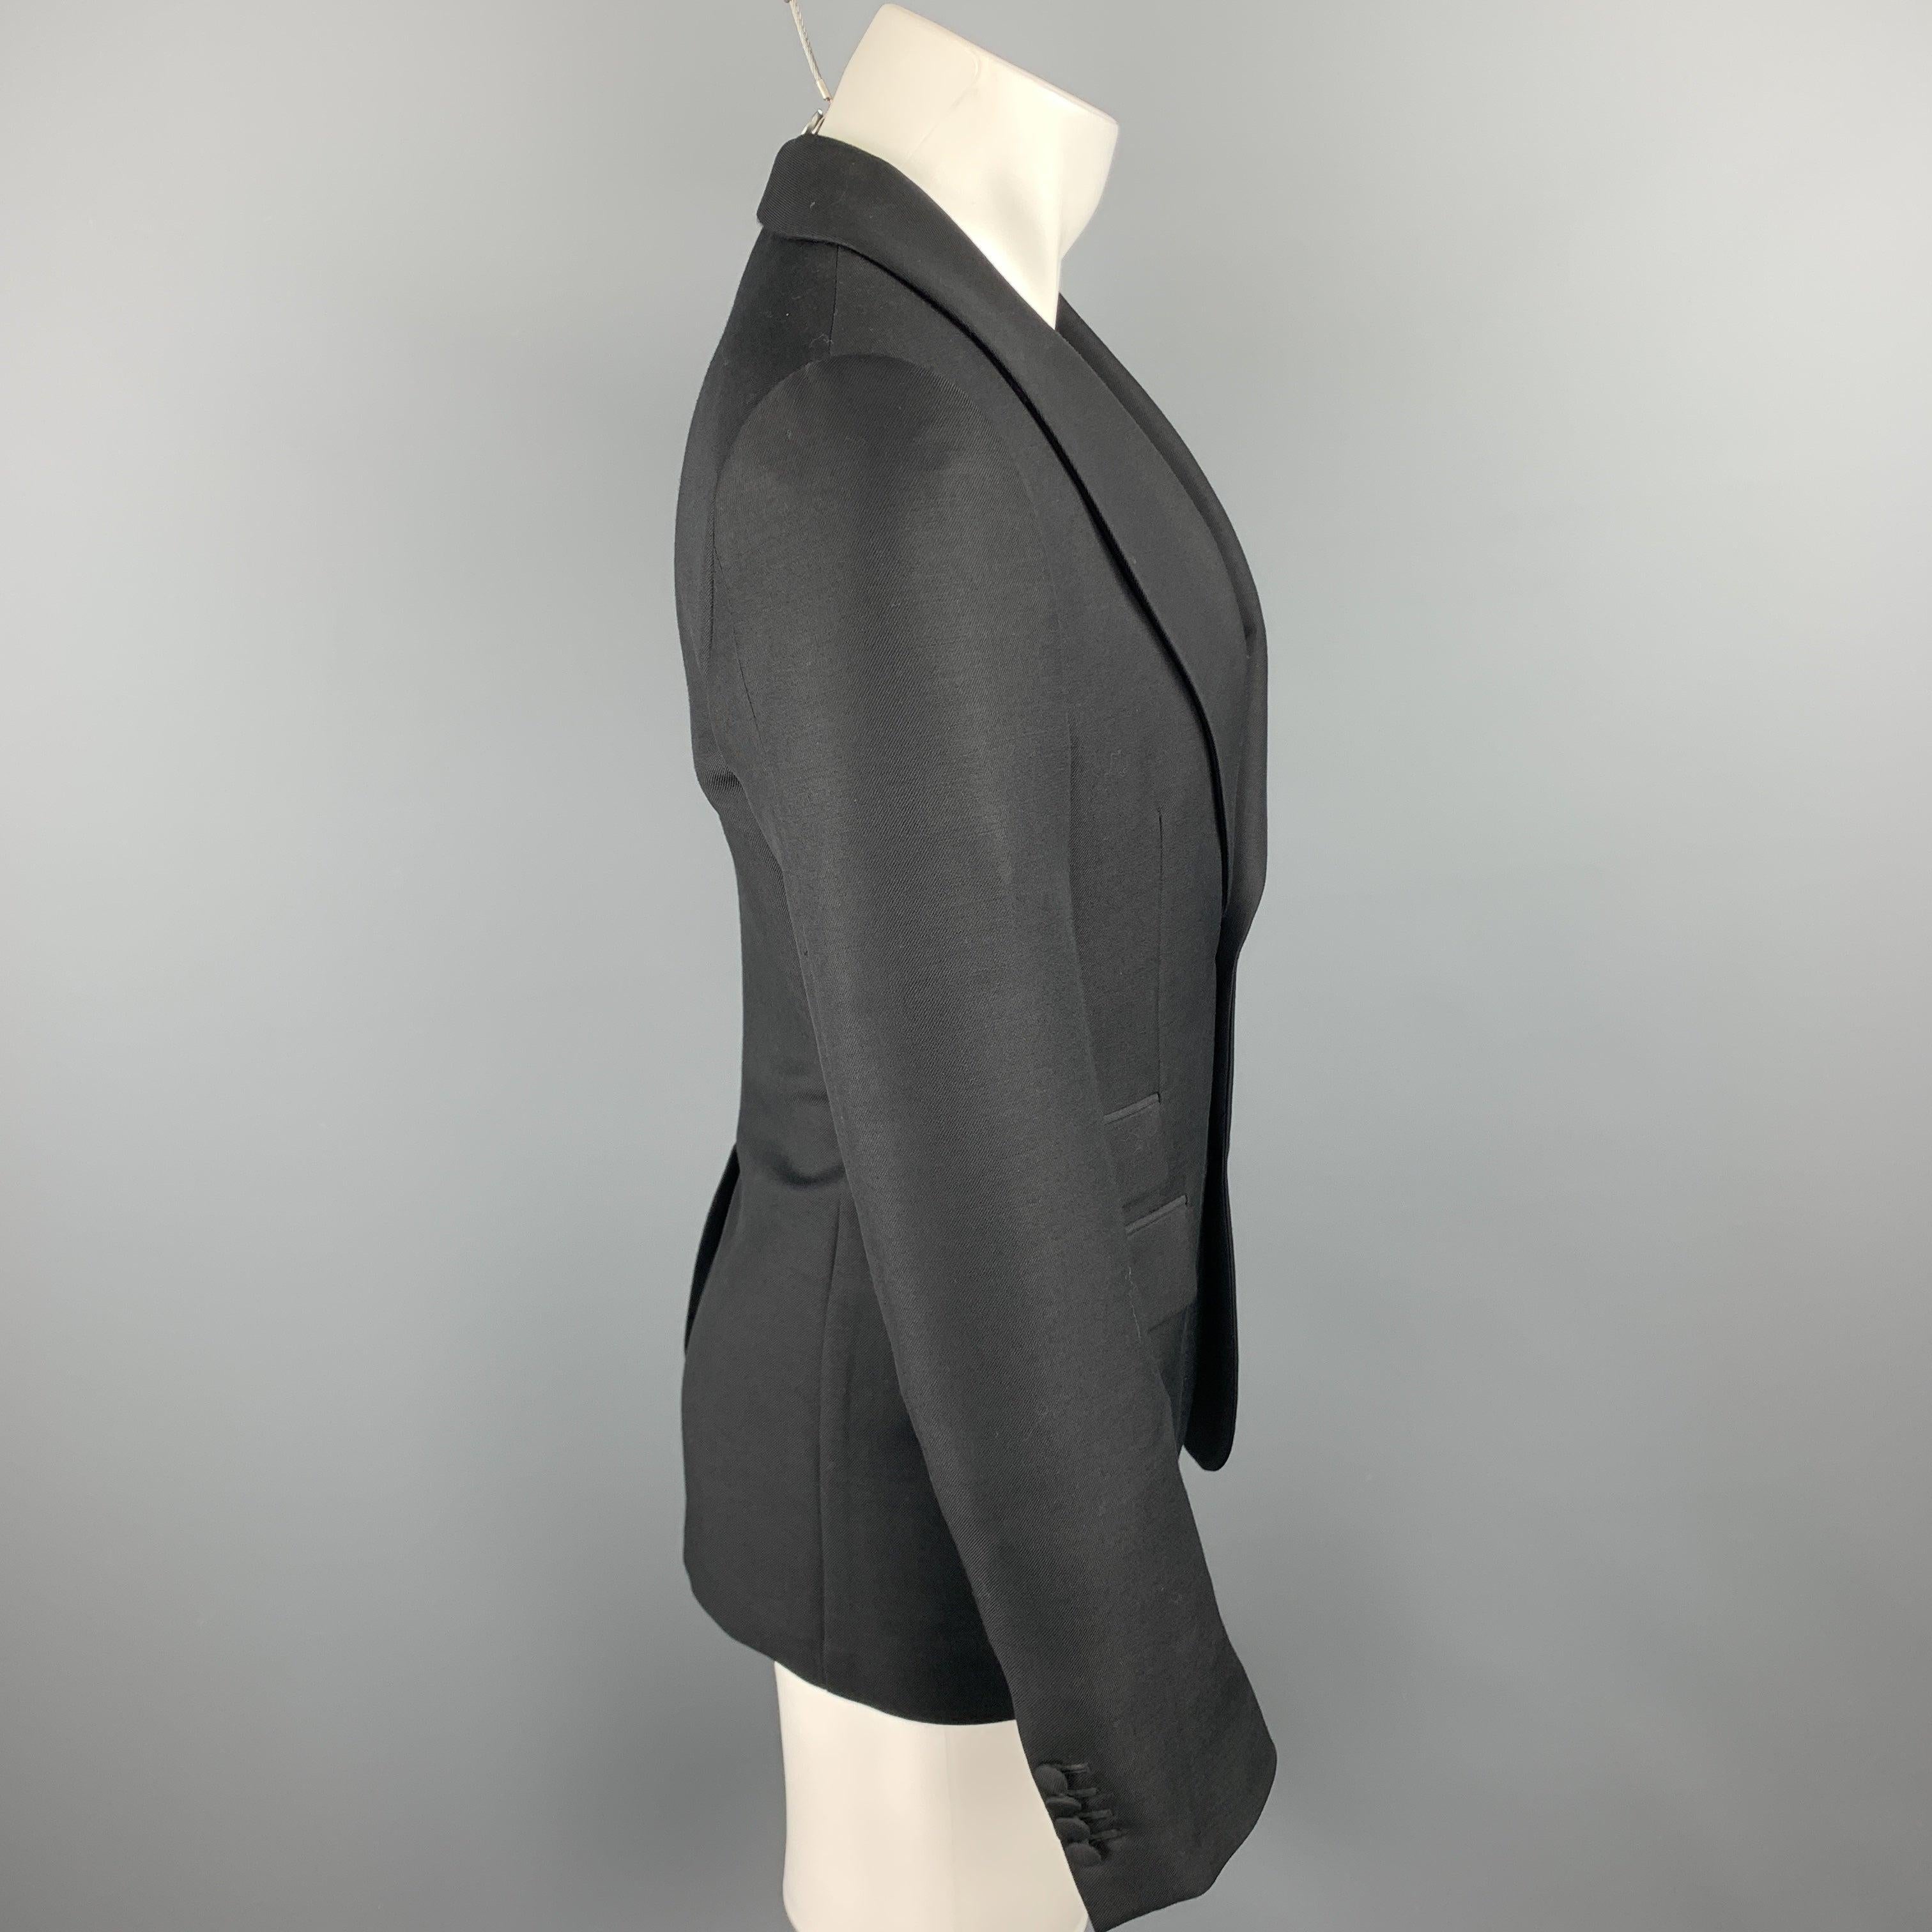 PRADA Size 36 Regular Black Solid Wool / Mohair Shawl Collar Sport Coat In Excellent Condition For Sale In San Francisco, CA